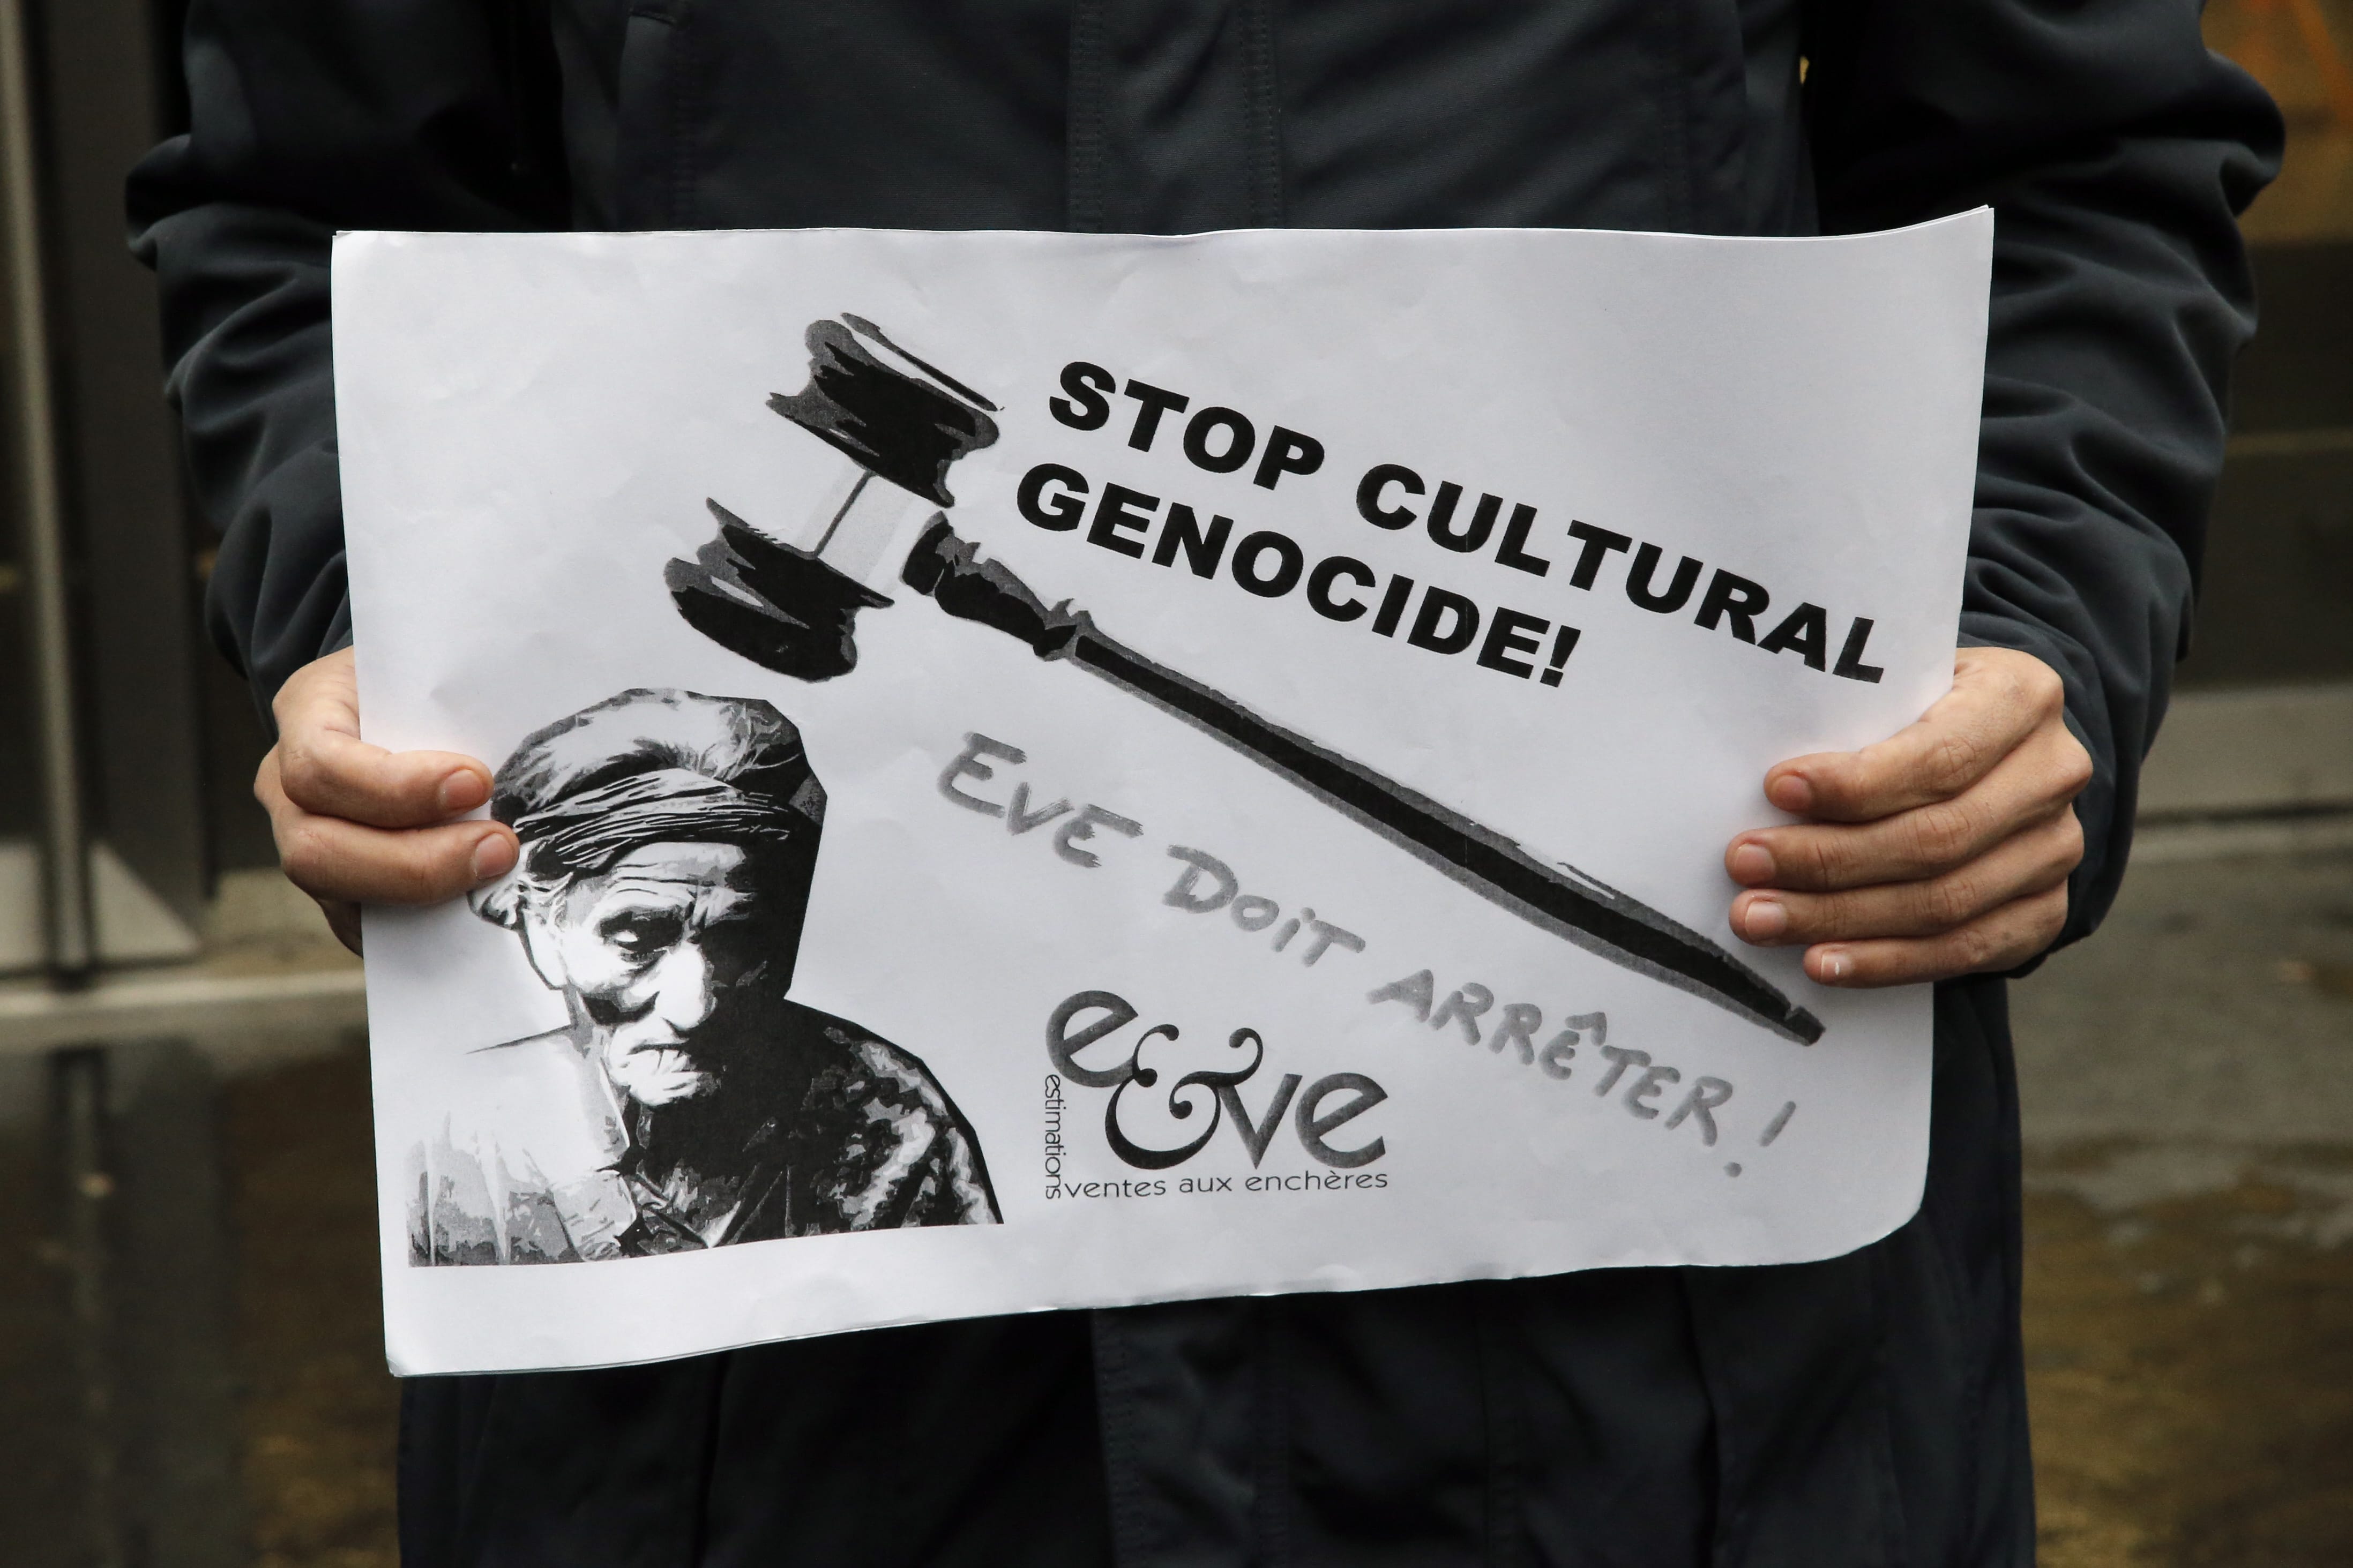 A supporter of Native Americans holds a leaflet reading &quot;Stop cultural genocide, Eve auction house must stop&quot; to protest outside of the Drouot's auction house during the contested auction of Native American items in Paris on Monday.